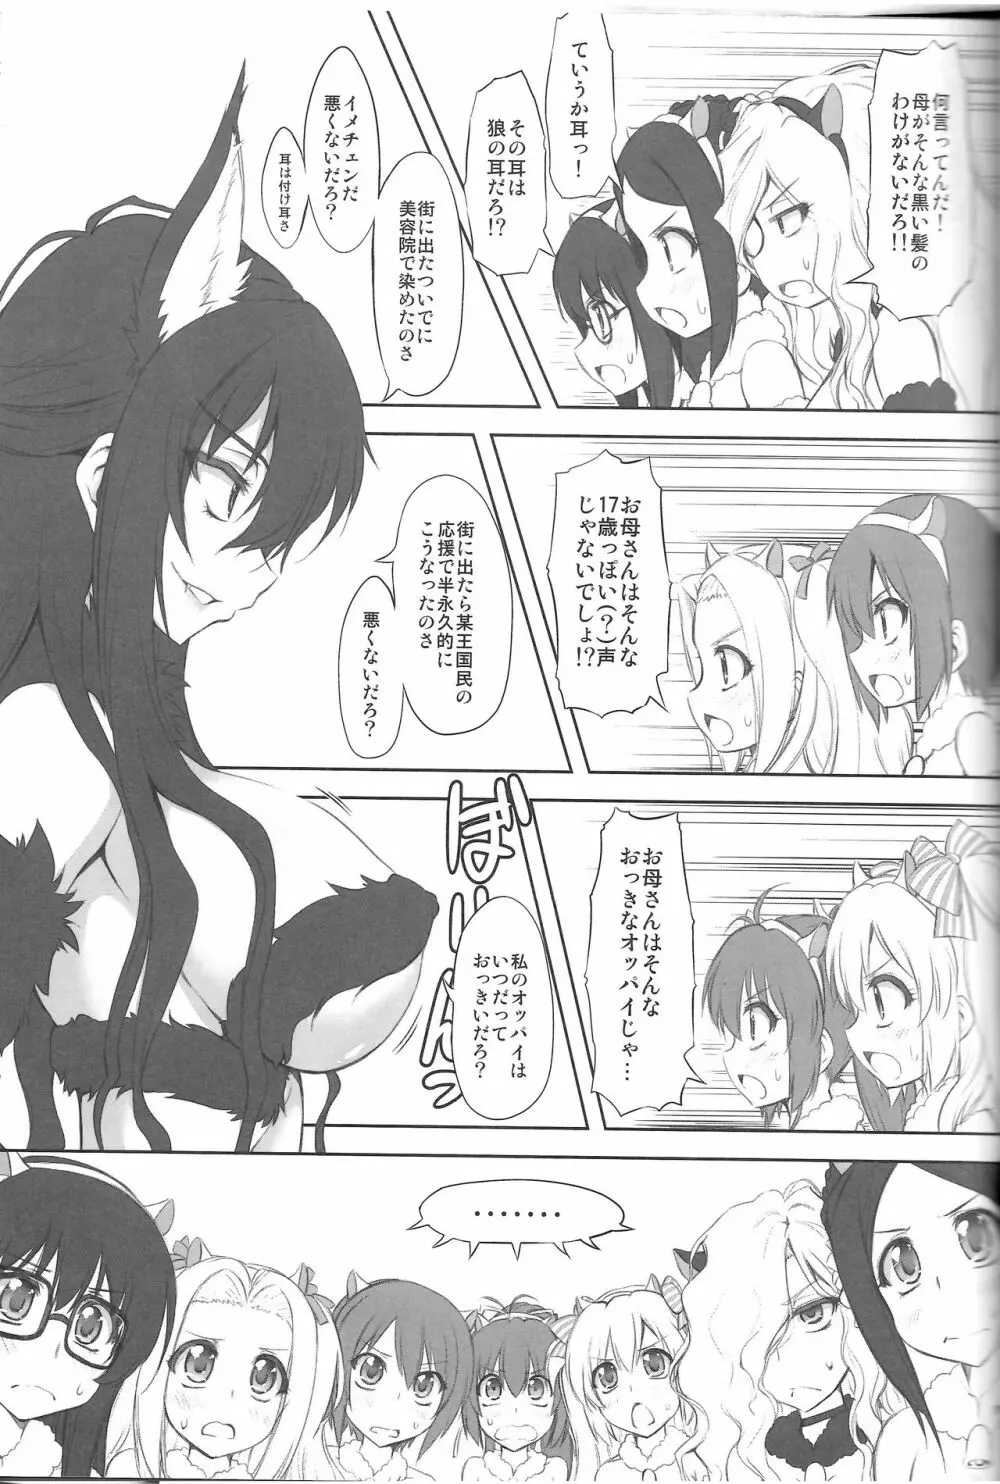 7Girls and wolf Page.13